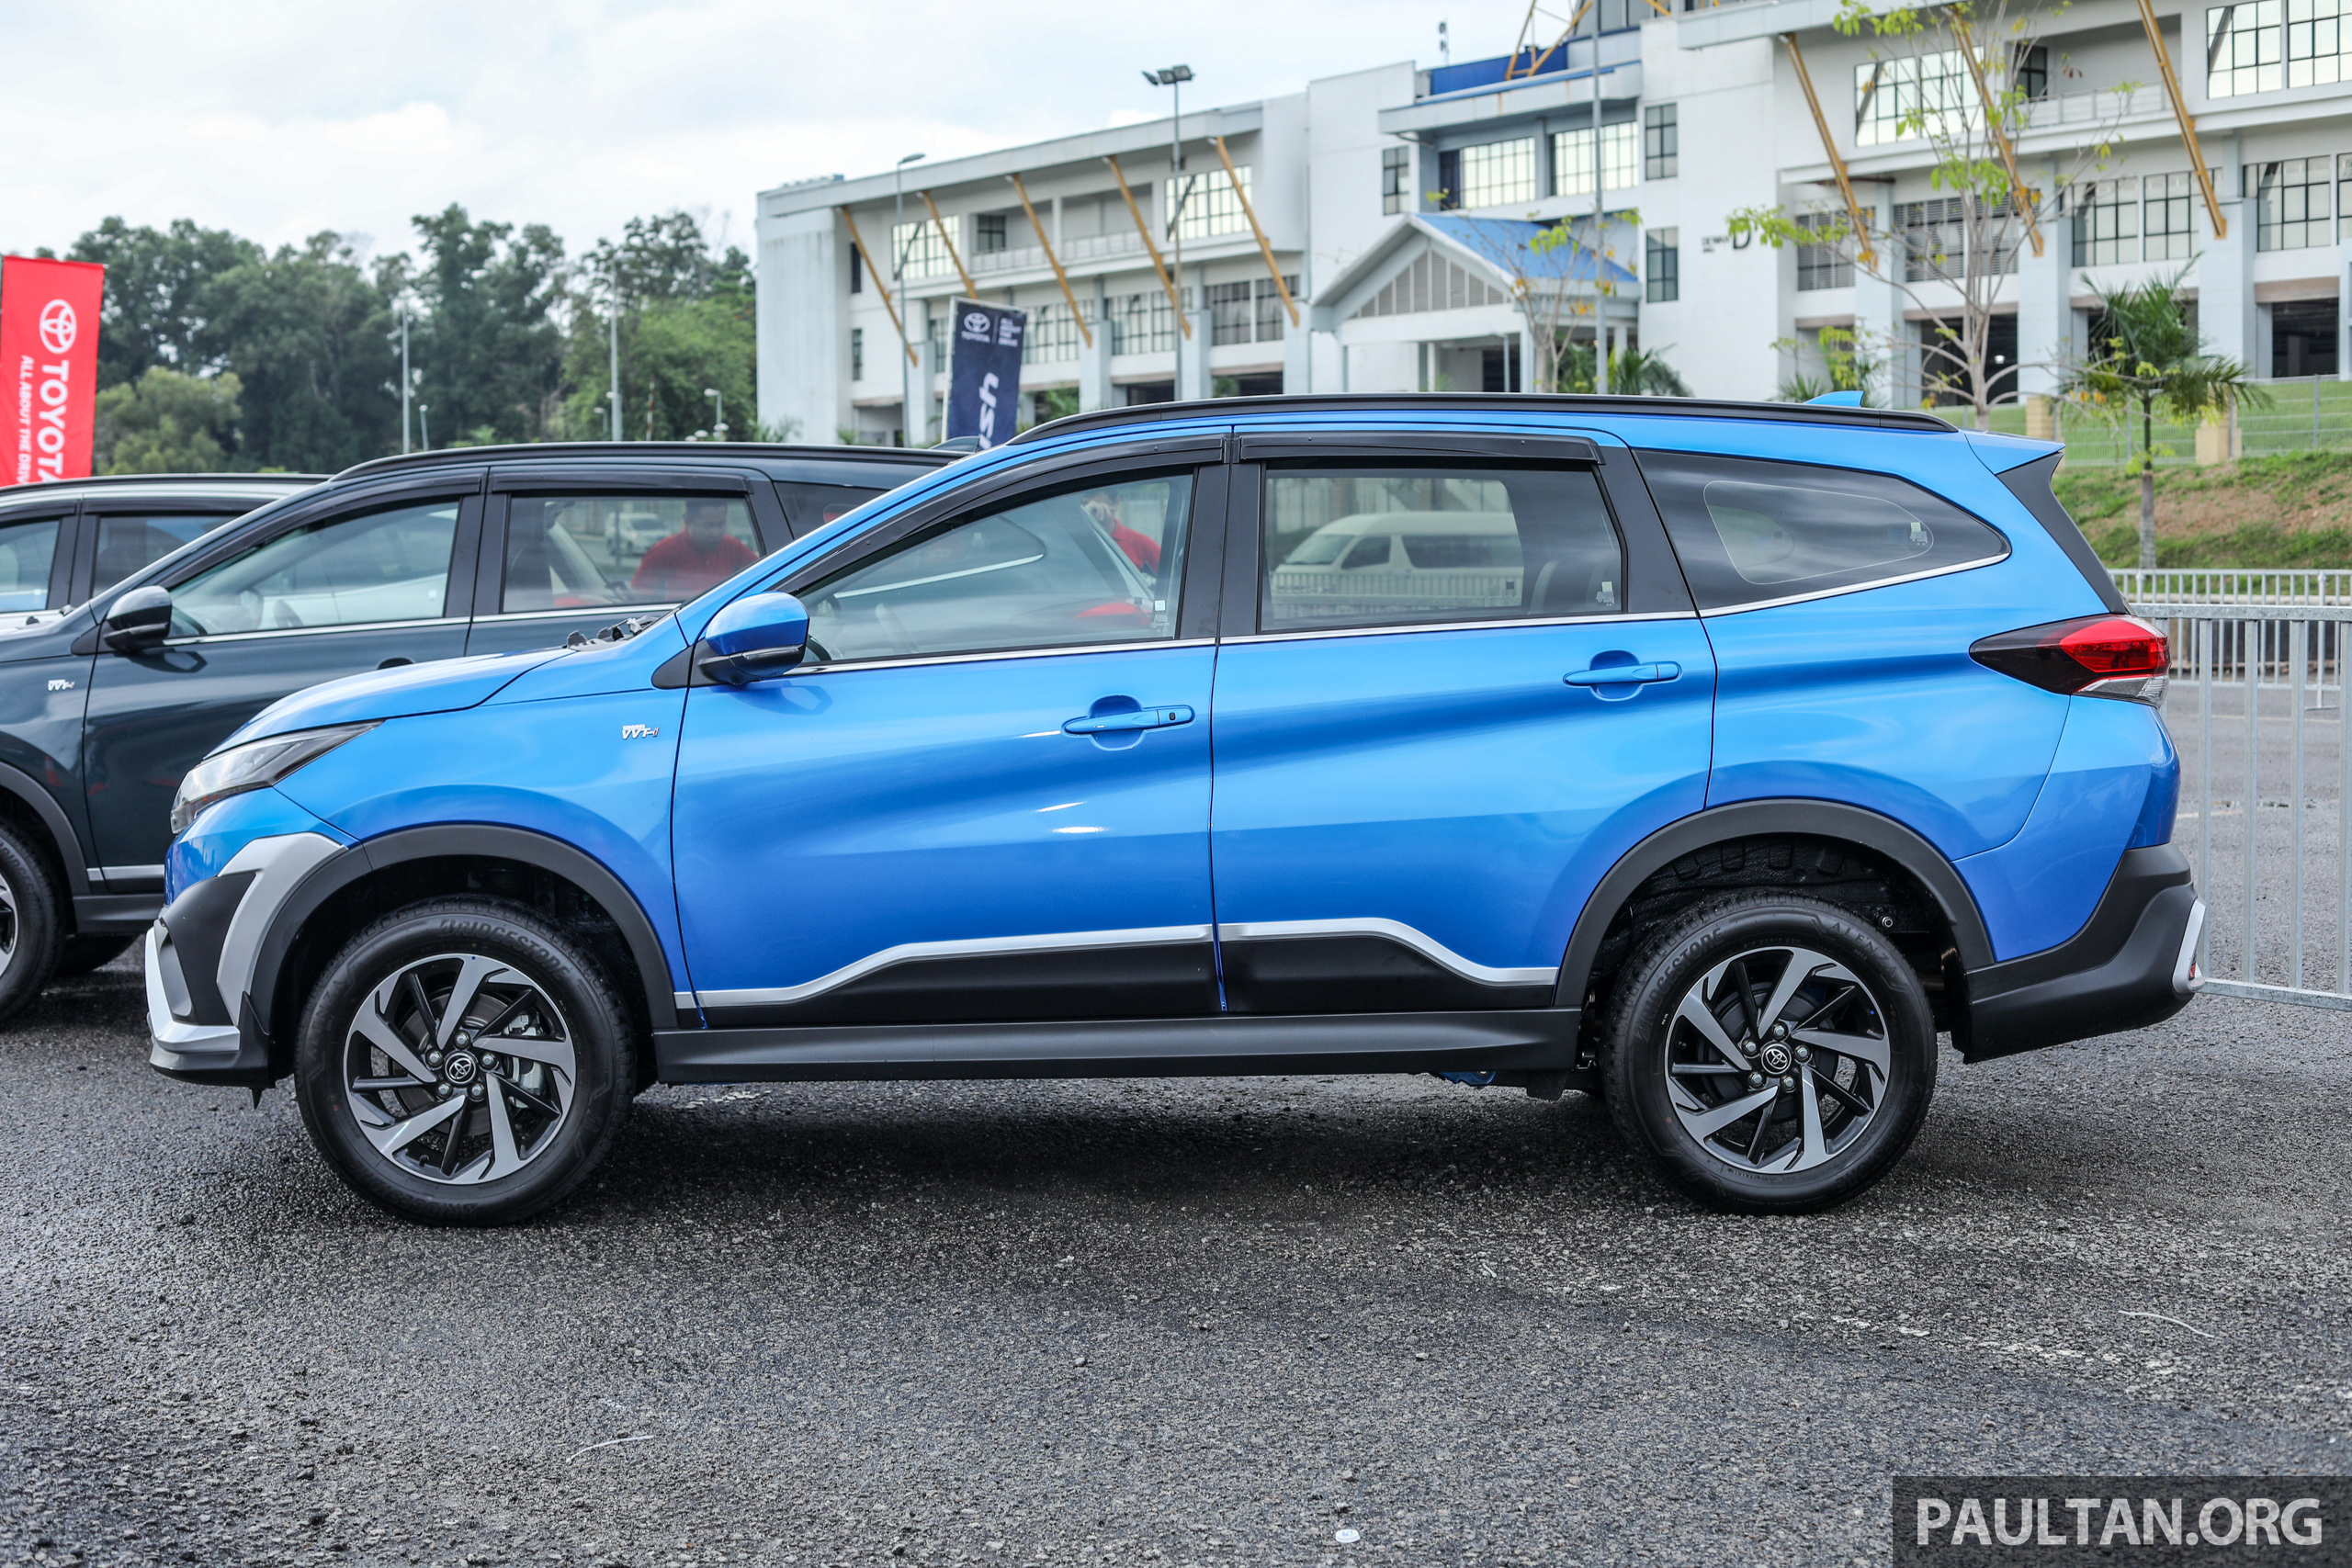 2018 Toyota Rush launched in Malaysia - new 1.5L engine, Pre-Collision ...